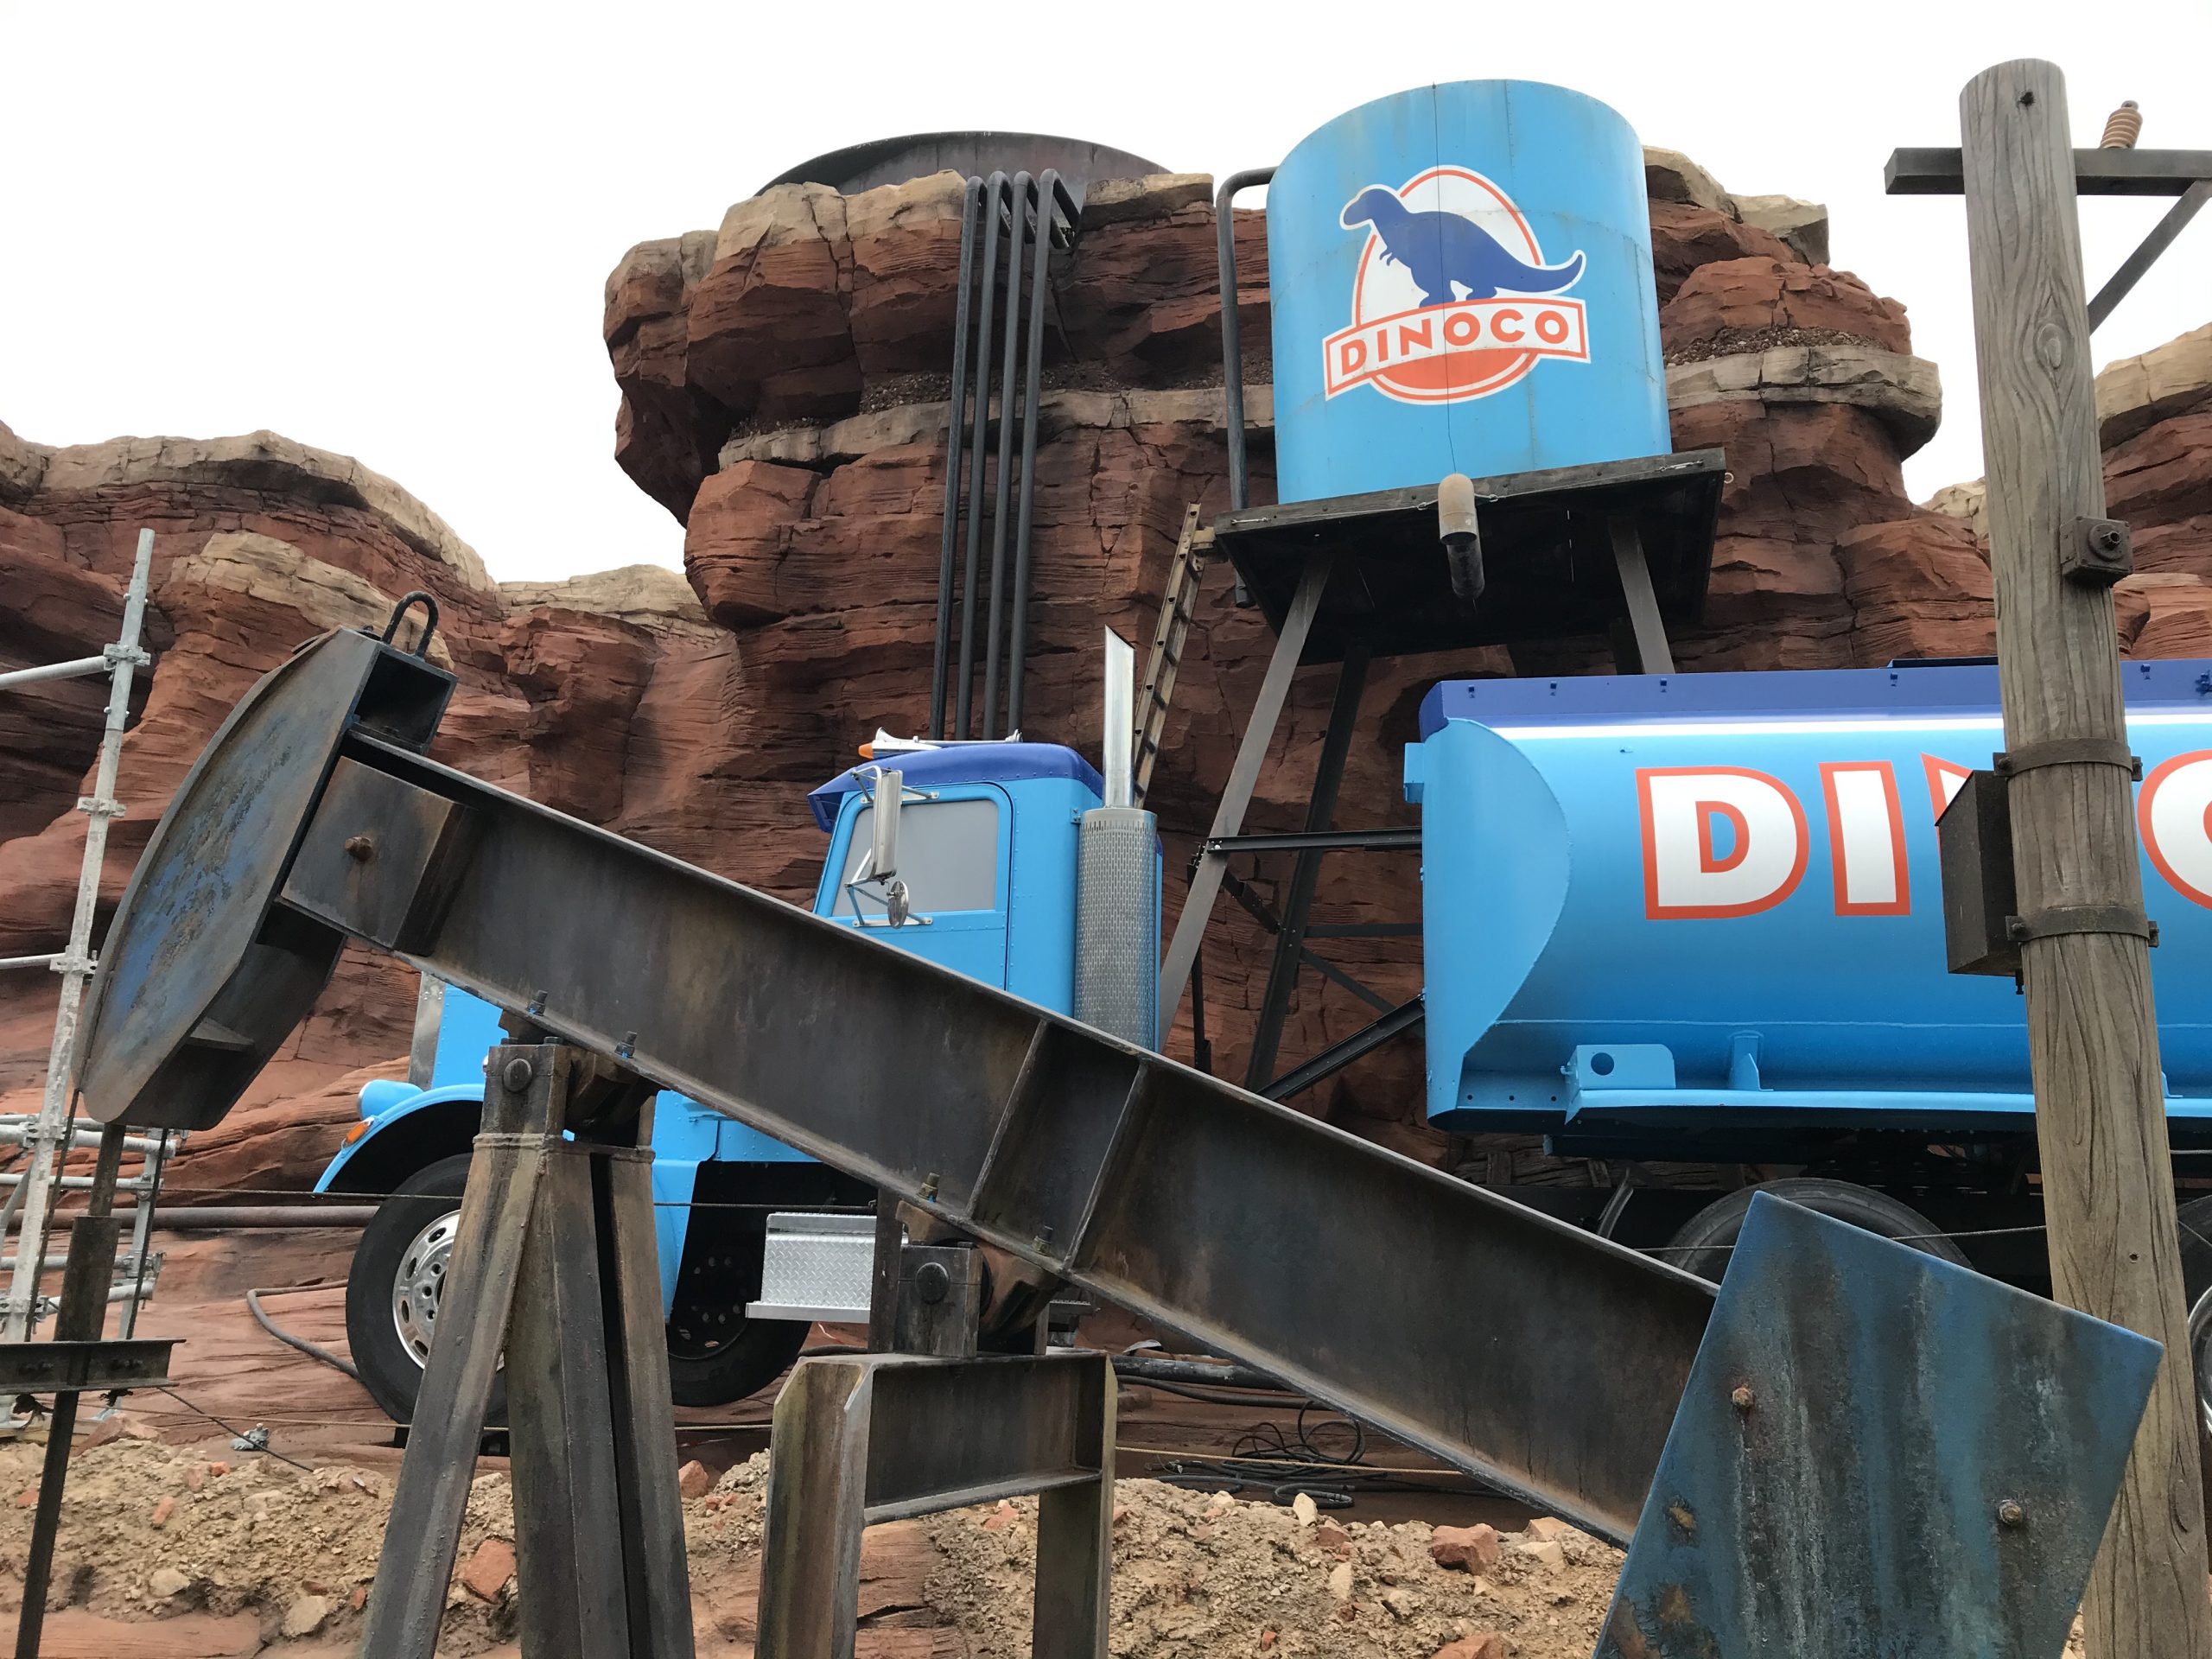 Construction Continues on Attraction Inspired by Cars